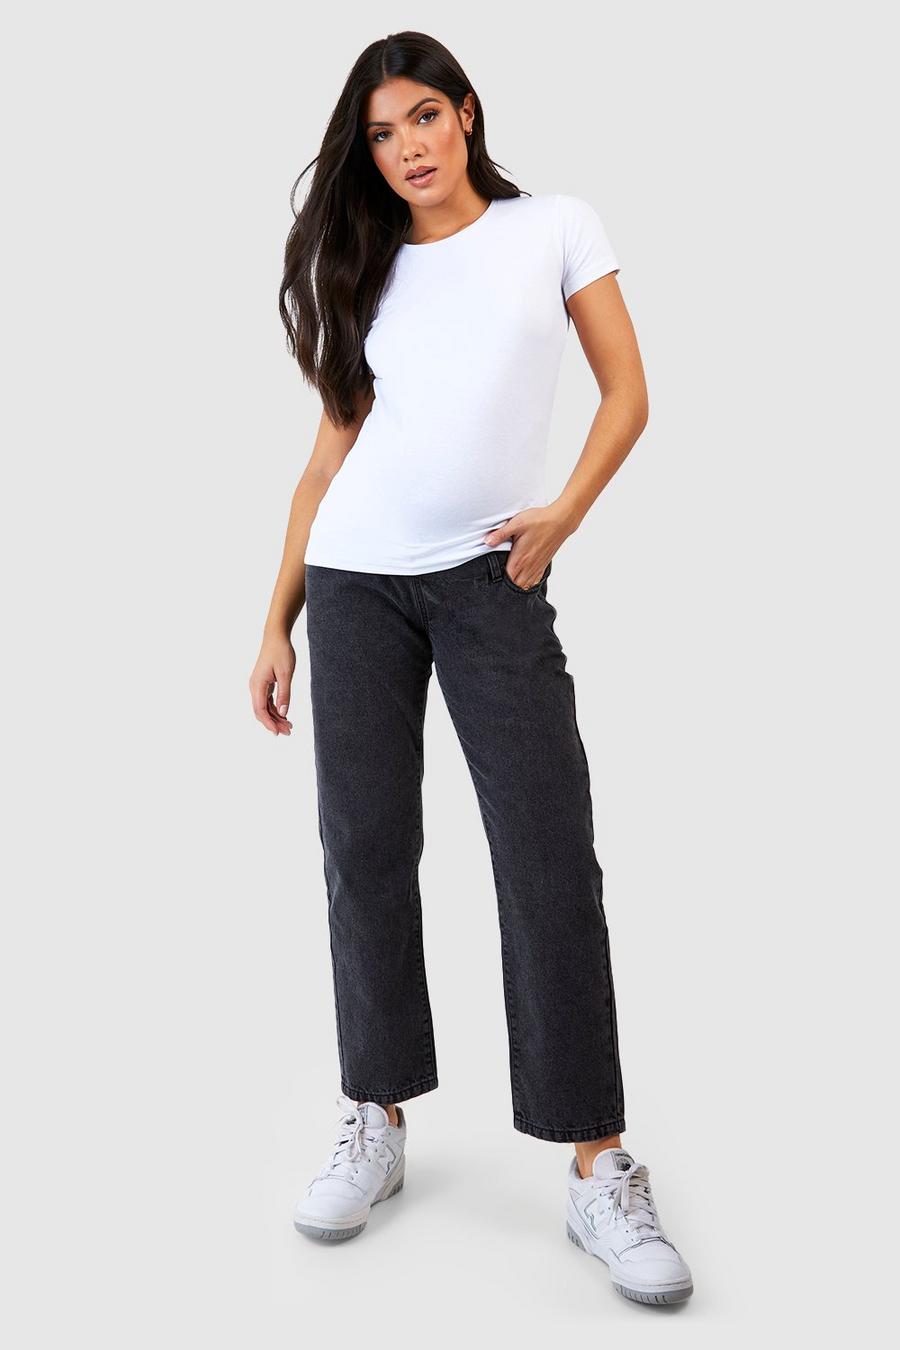 Washed black Maternity Over Bump Straight Leg Jeans